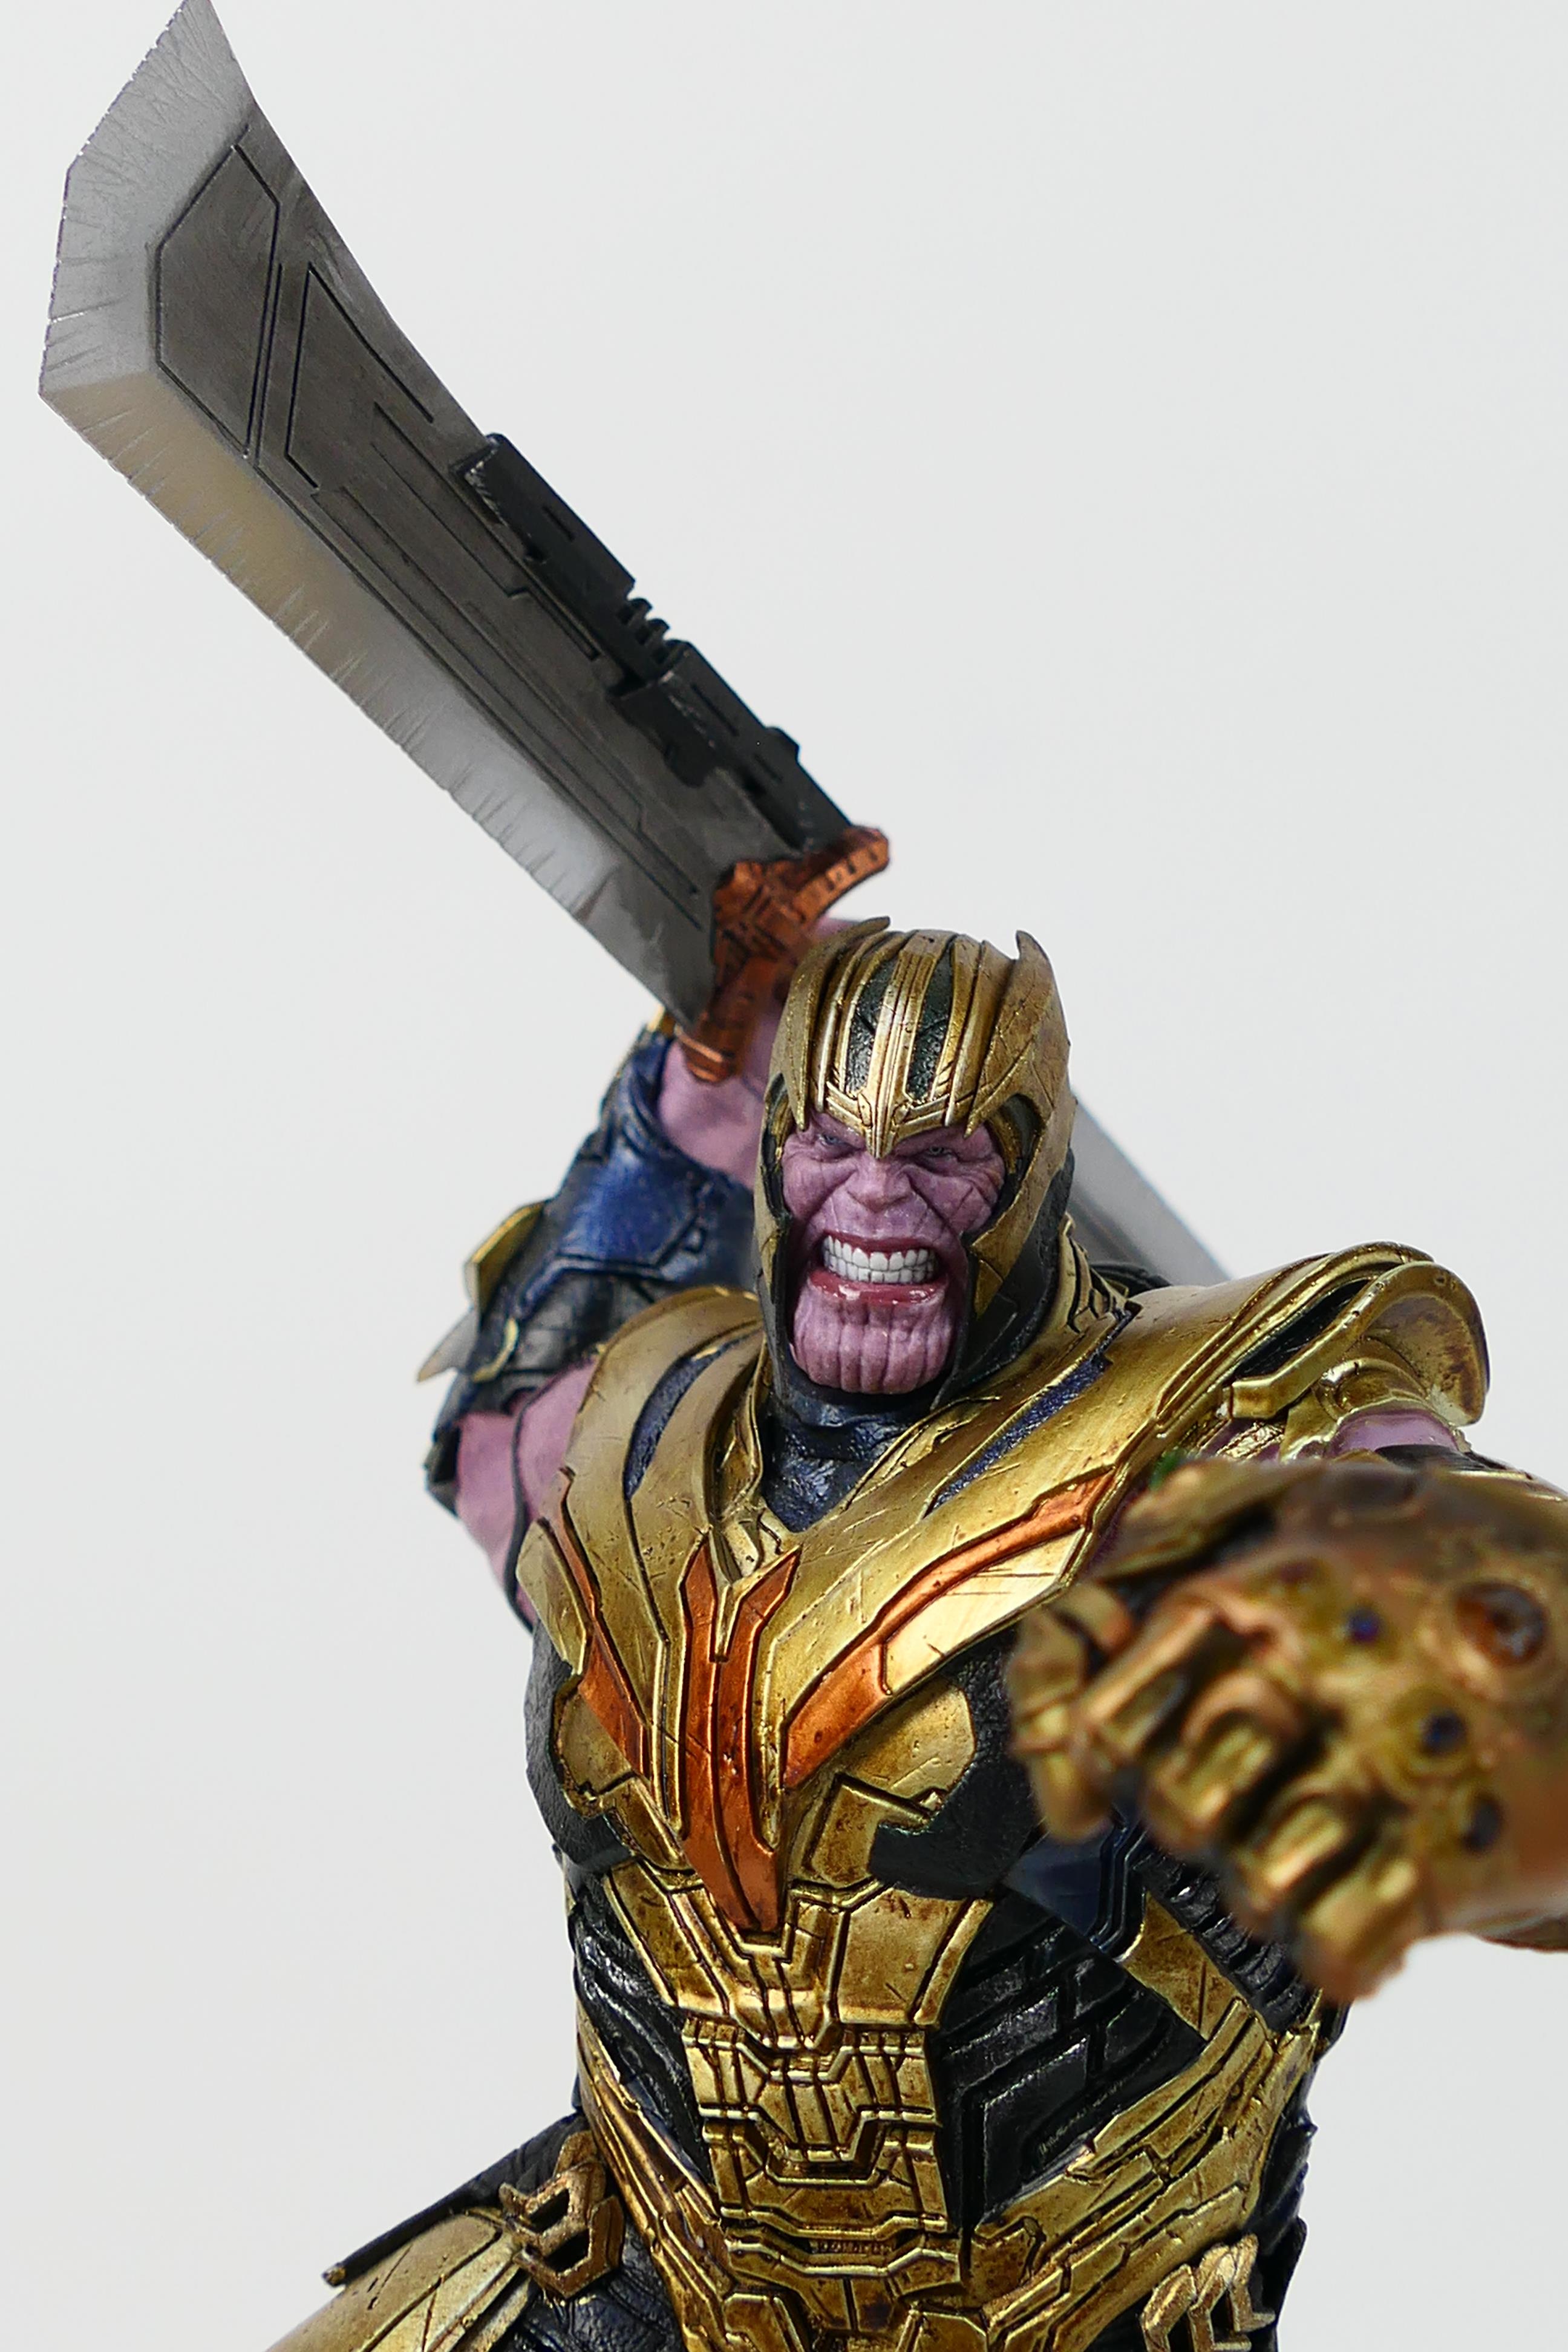 Marvel - Iron Studios - A limited edition BDS Deluxe Avengers Endgame Thanos statue in 1/10 scale. - Image 6 of 8